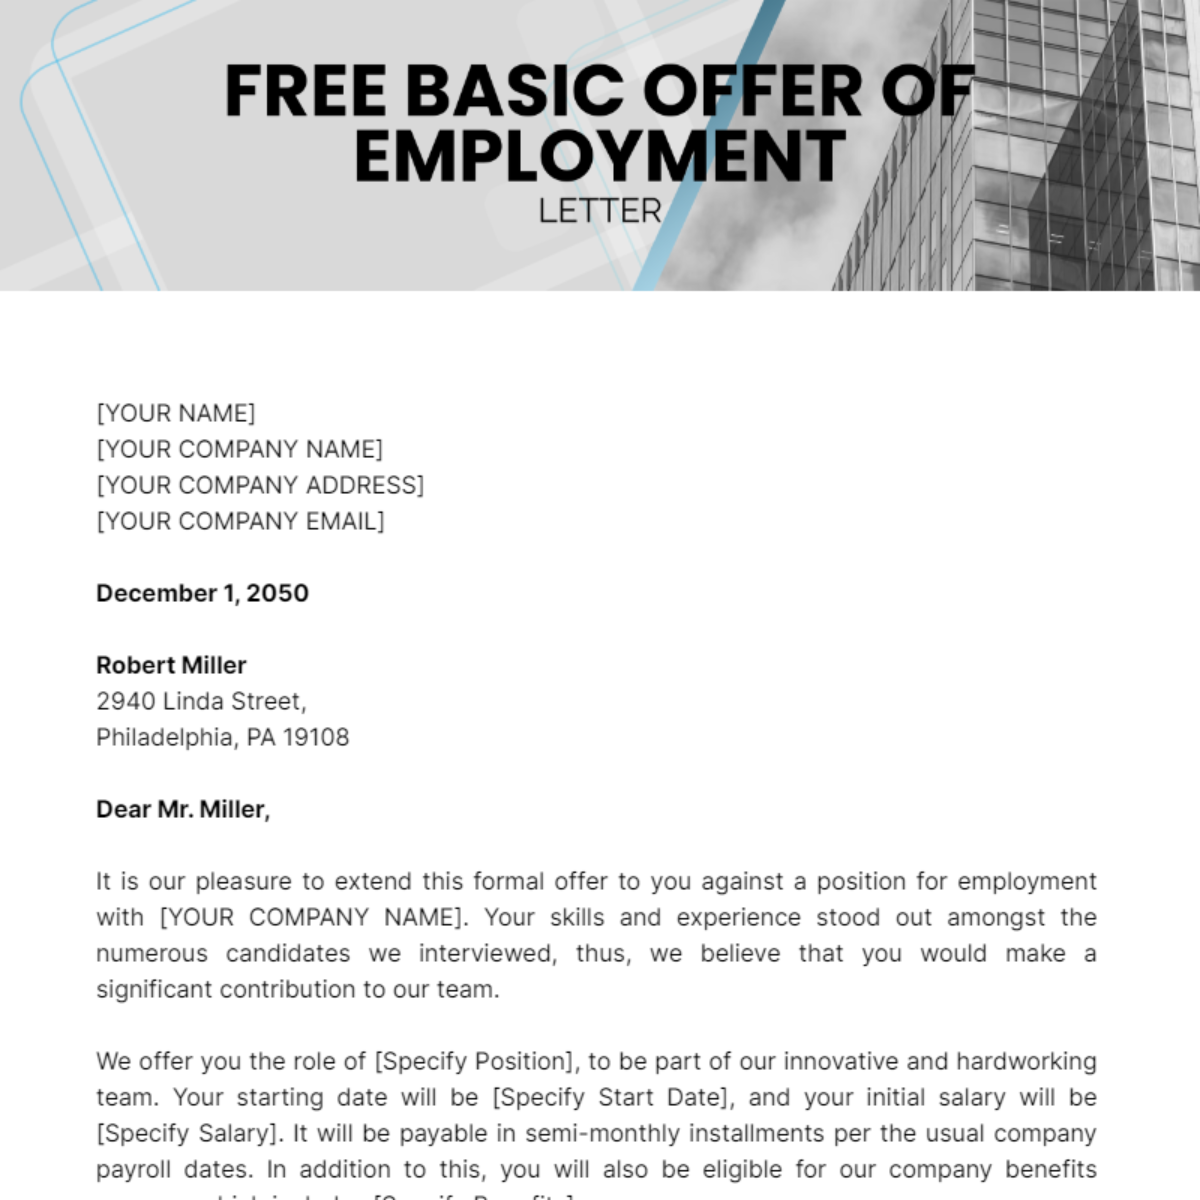 Basic Offer of Employment Letter Template